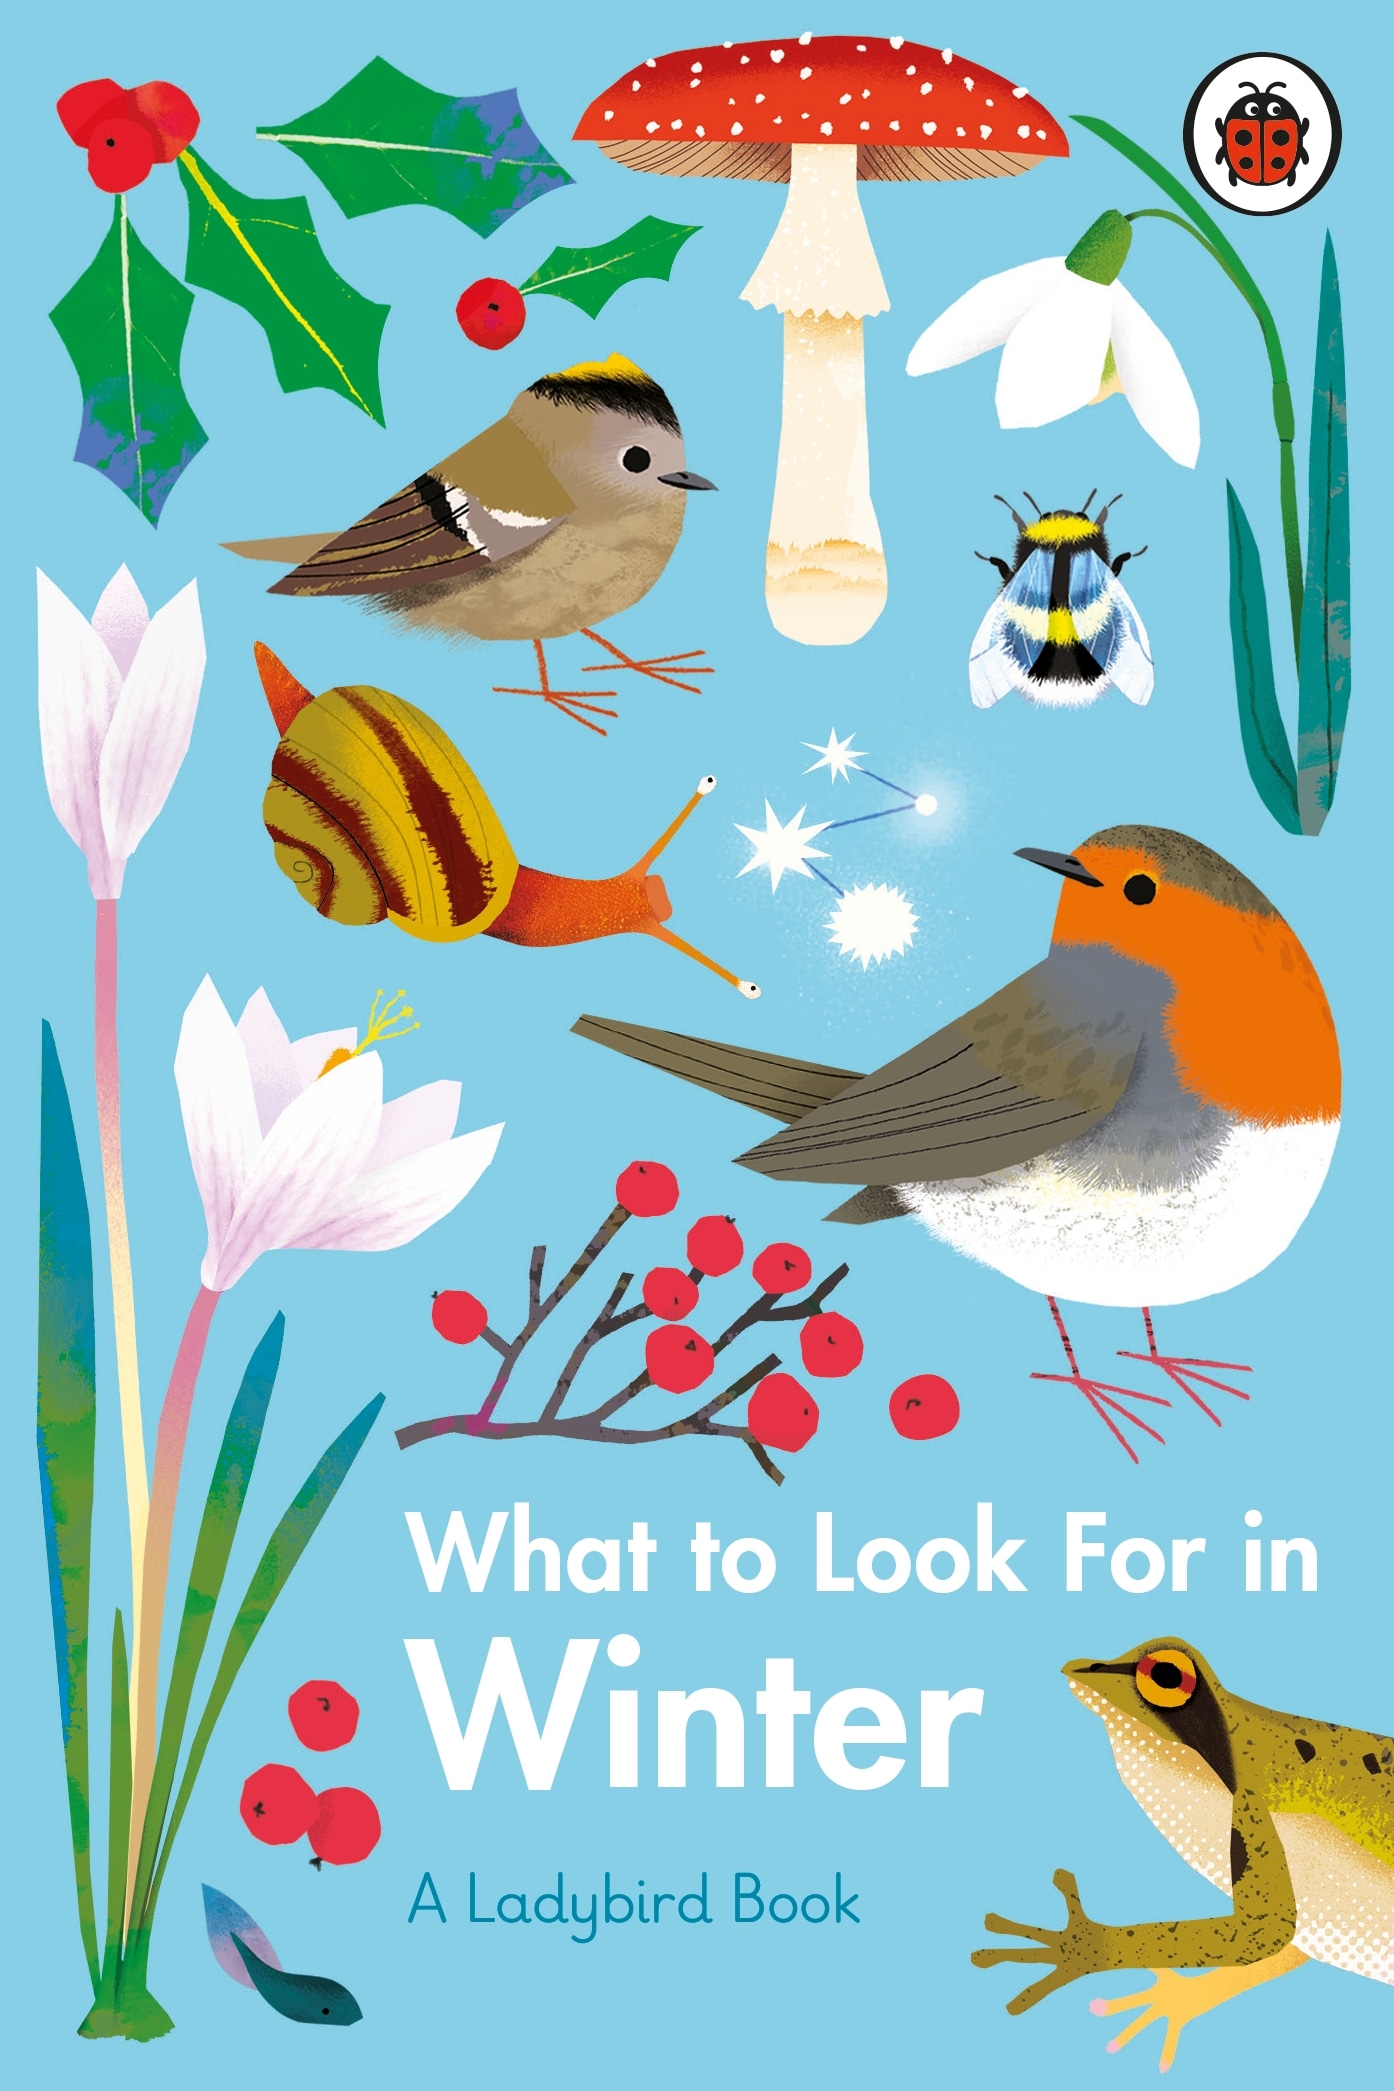 Book “What to Look For in Winter” by Elizabeth Jenner — January 21, 2021